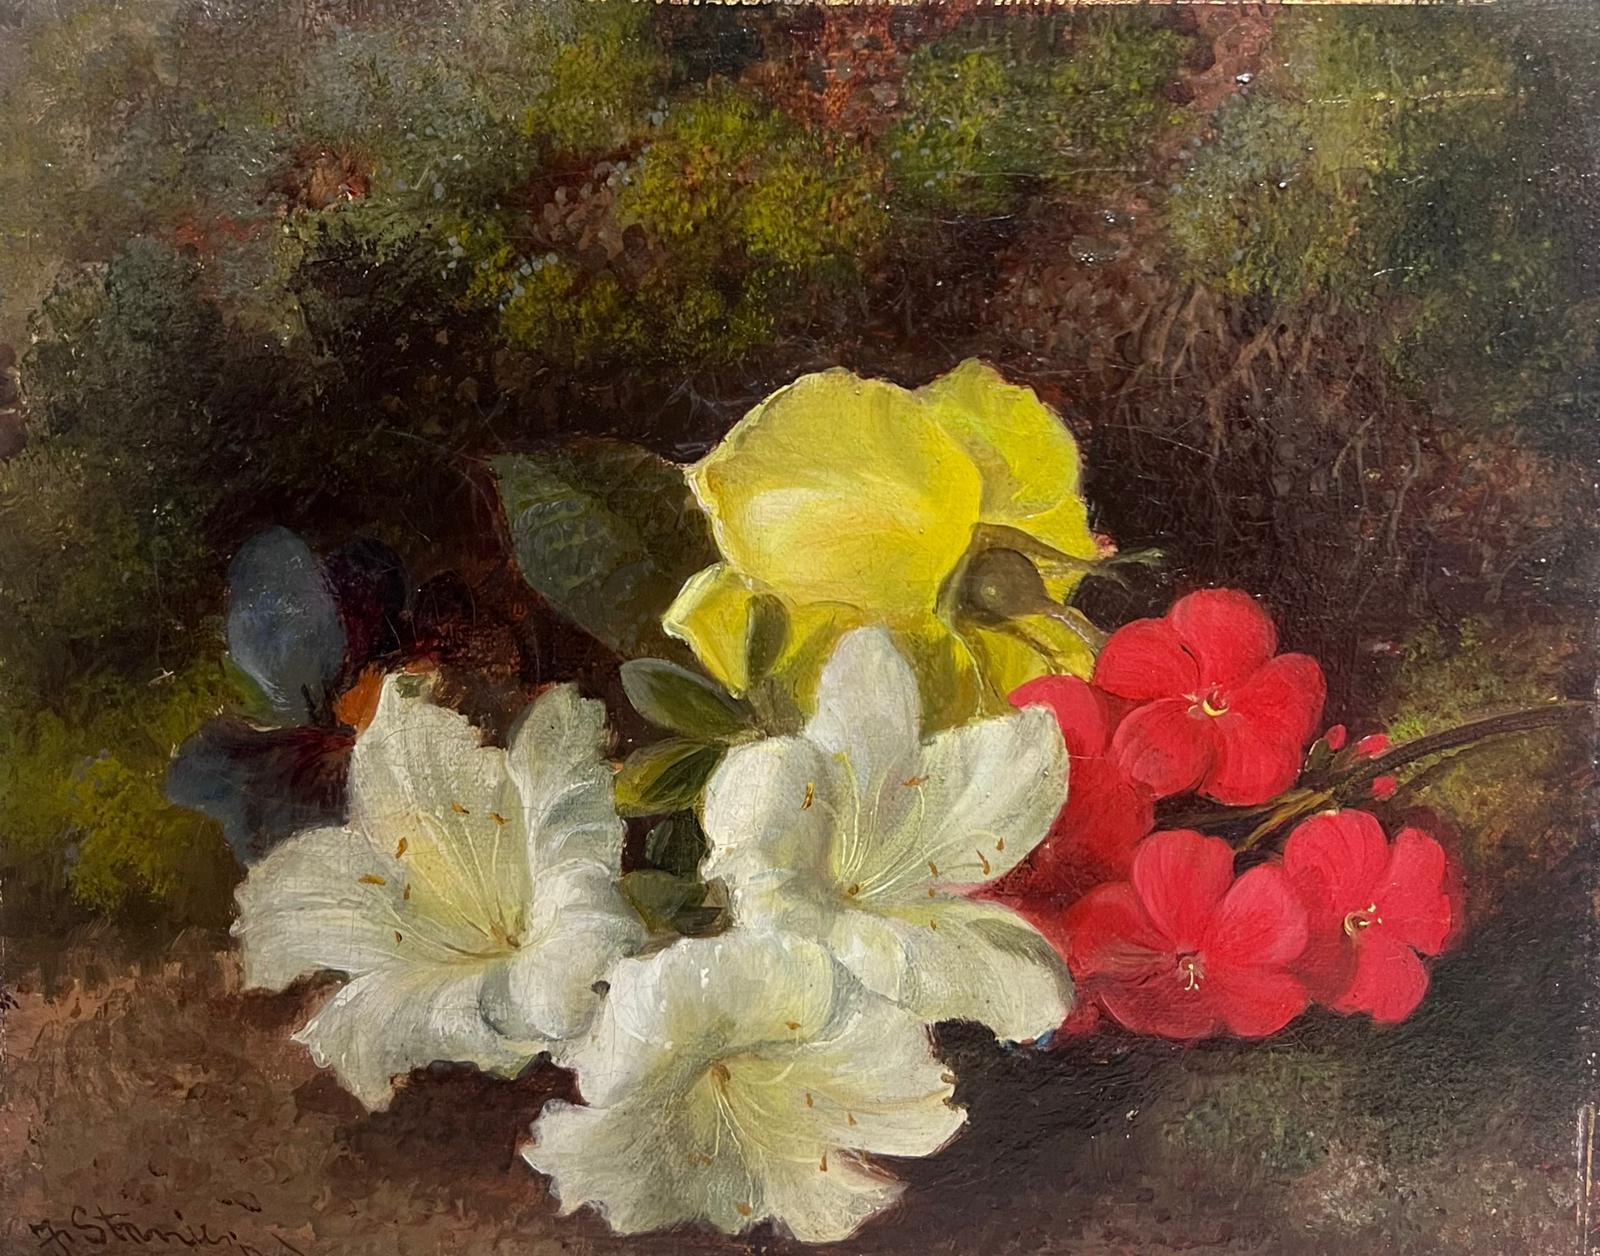 Still Life of Flowers
by Frederick J Stanier (1830-c.1912)
signed
oil on canvas, unframed
canvas: 8.25 x 10 inches
provenance: private collection, UK
condition: a very few scuffs and minor surface markings, overall very good and sound condition.